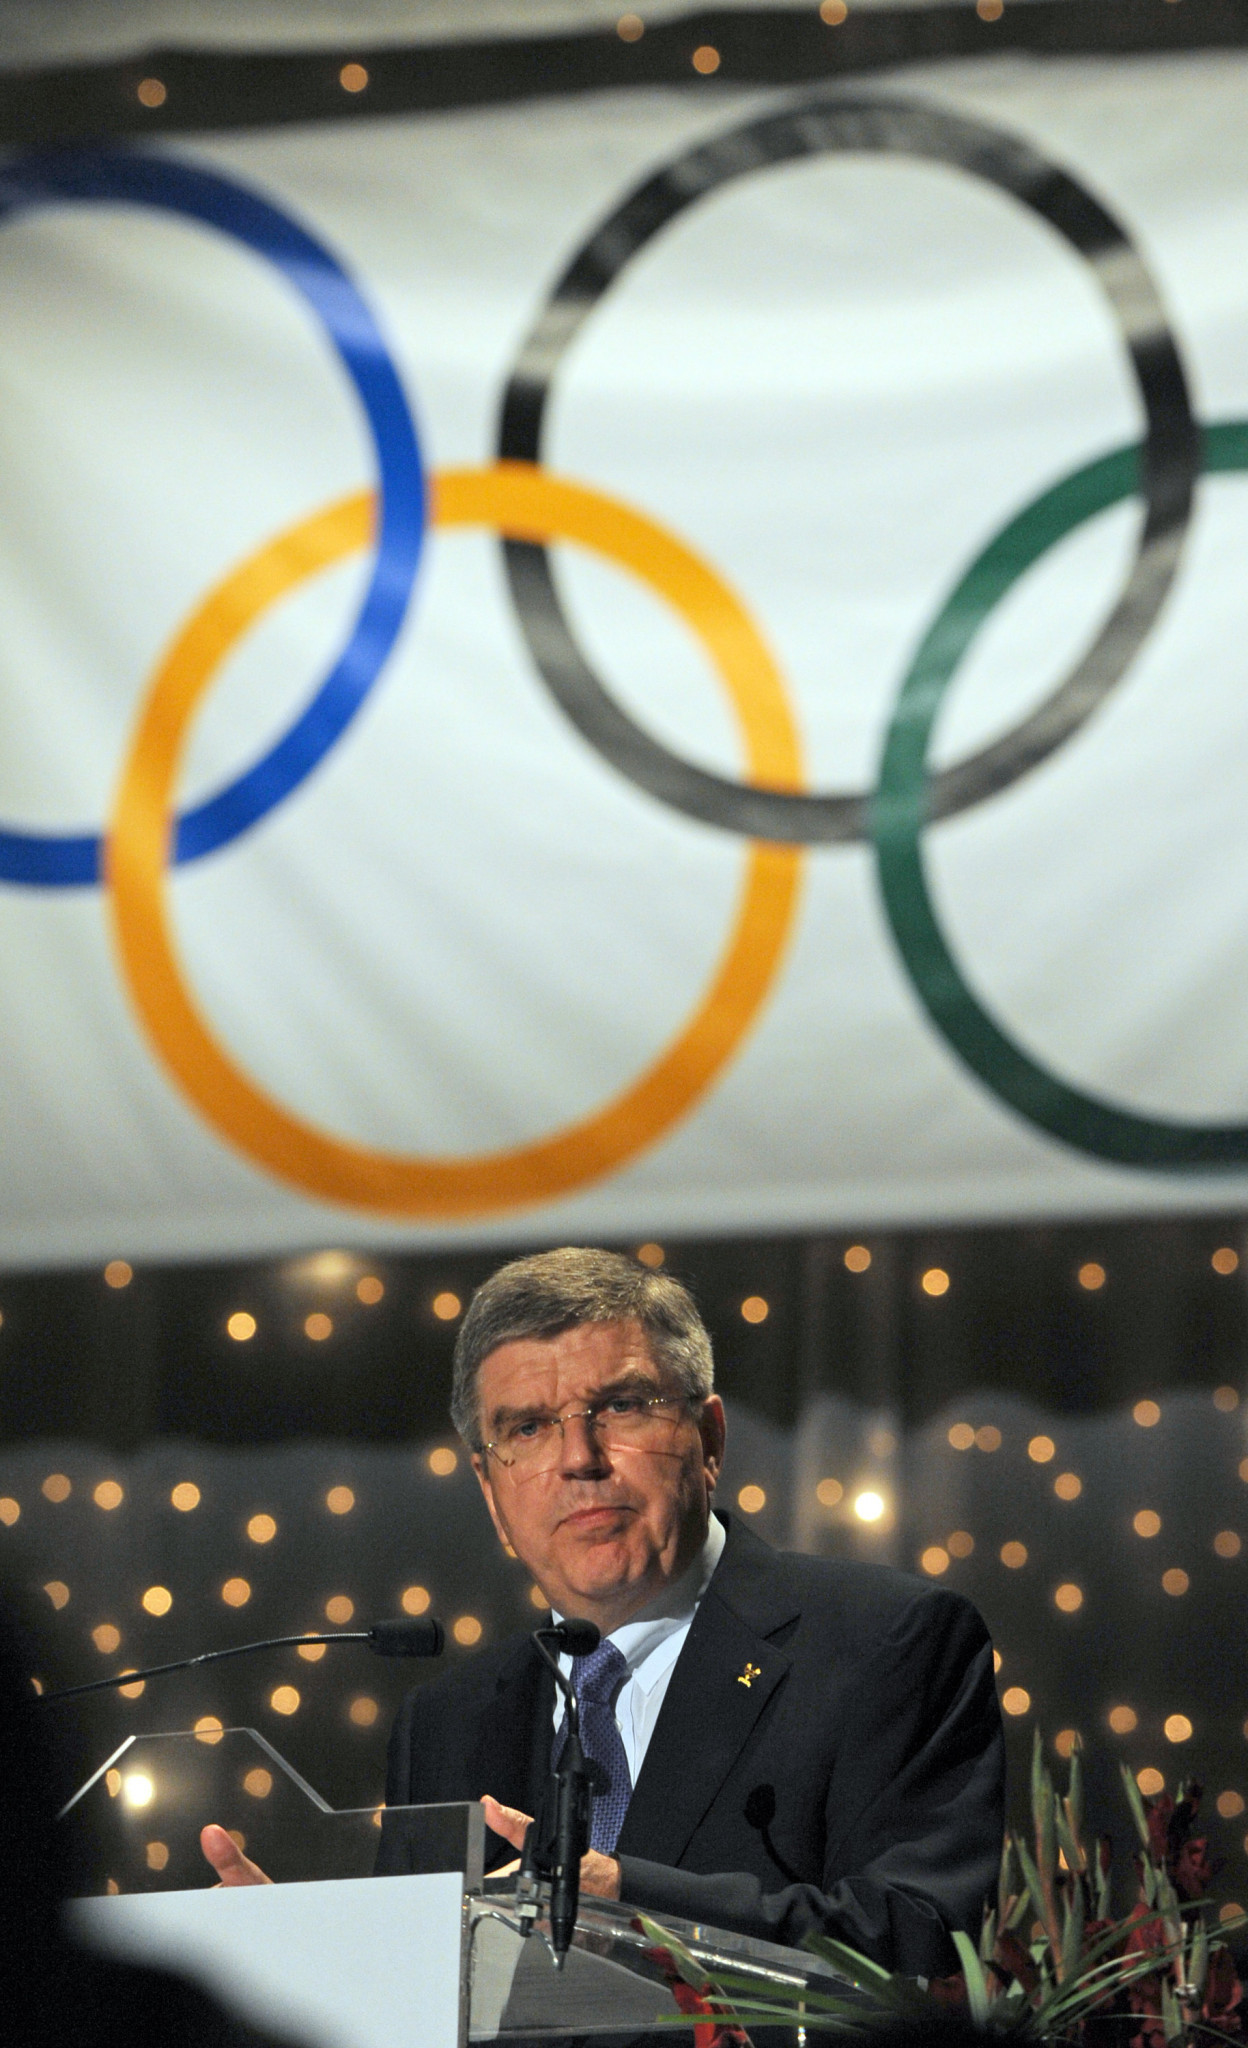 Thomas Bach, then vice-president of the IOC, speaks in Baden-Baden in 2011 during the event marking the 30th anniversary of the landmark IOC Congress in which he spoke as an athlete ©Getty Images  